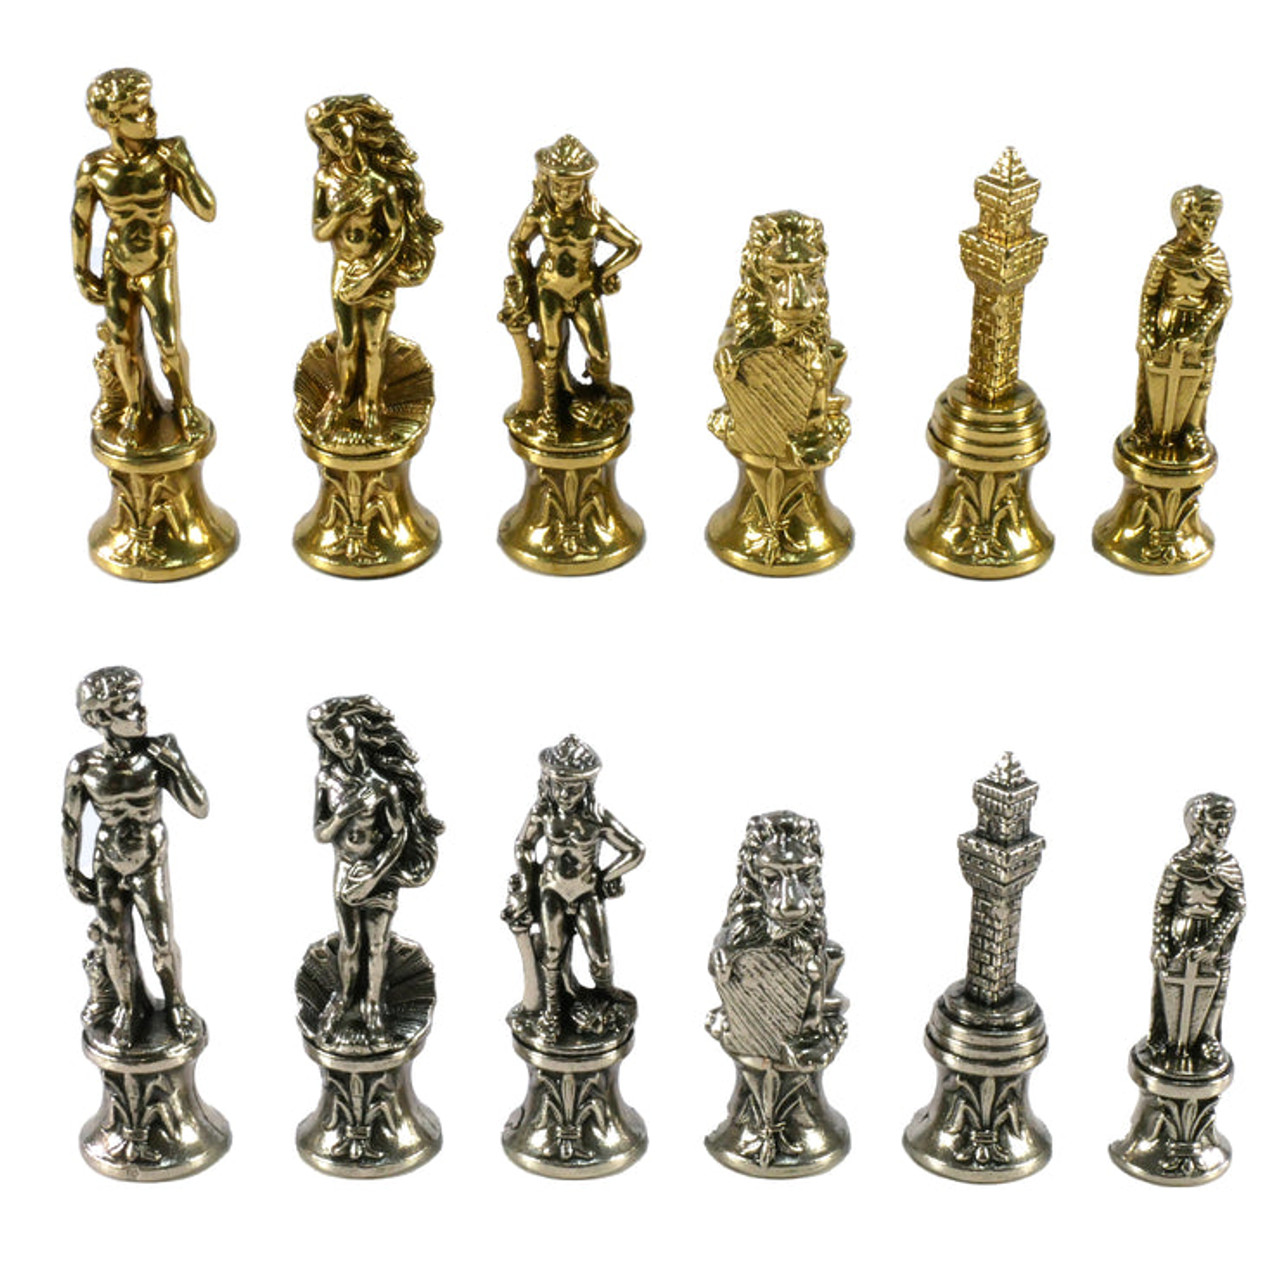 The Florence Chess Pieces - Metal with 3.25" King